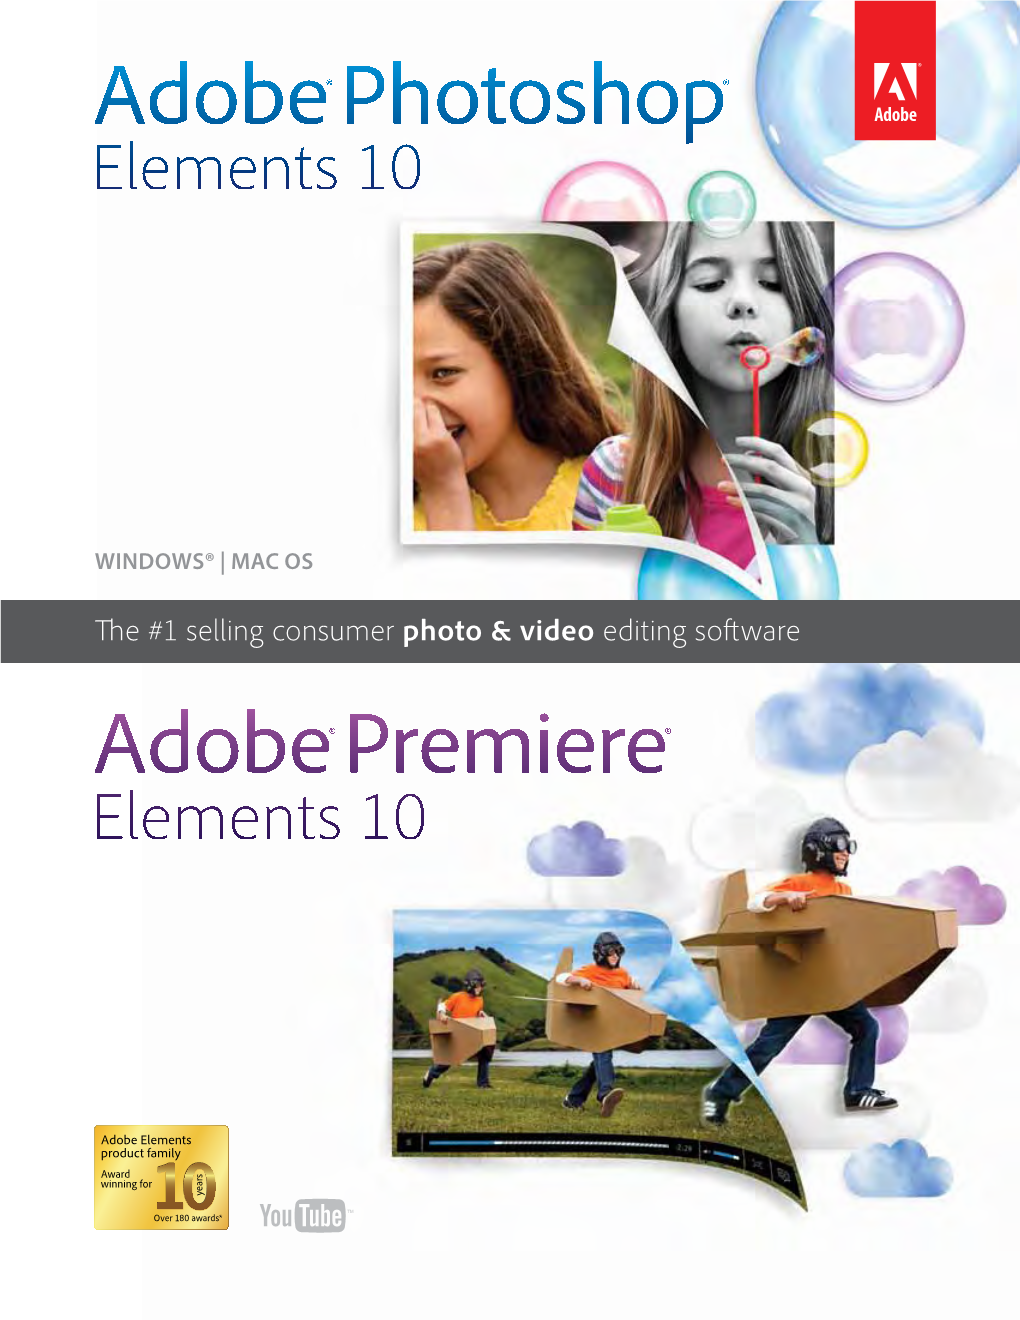 Adobe Photoshop Elements and Premiere Elements 10 Product